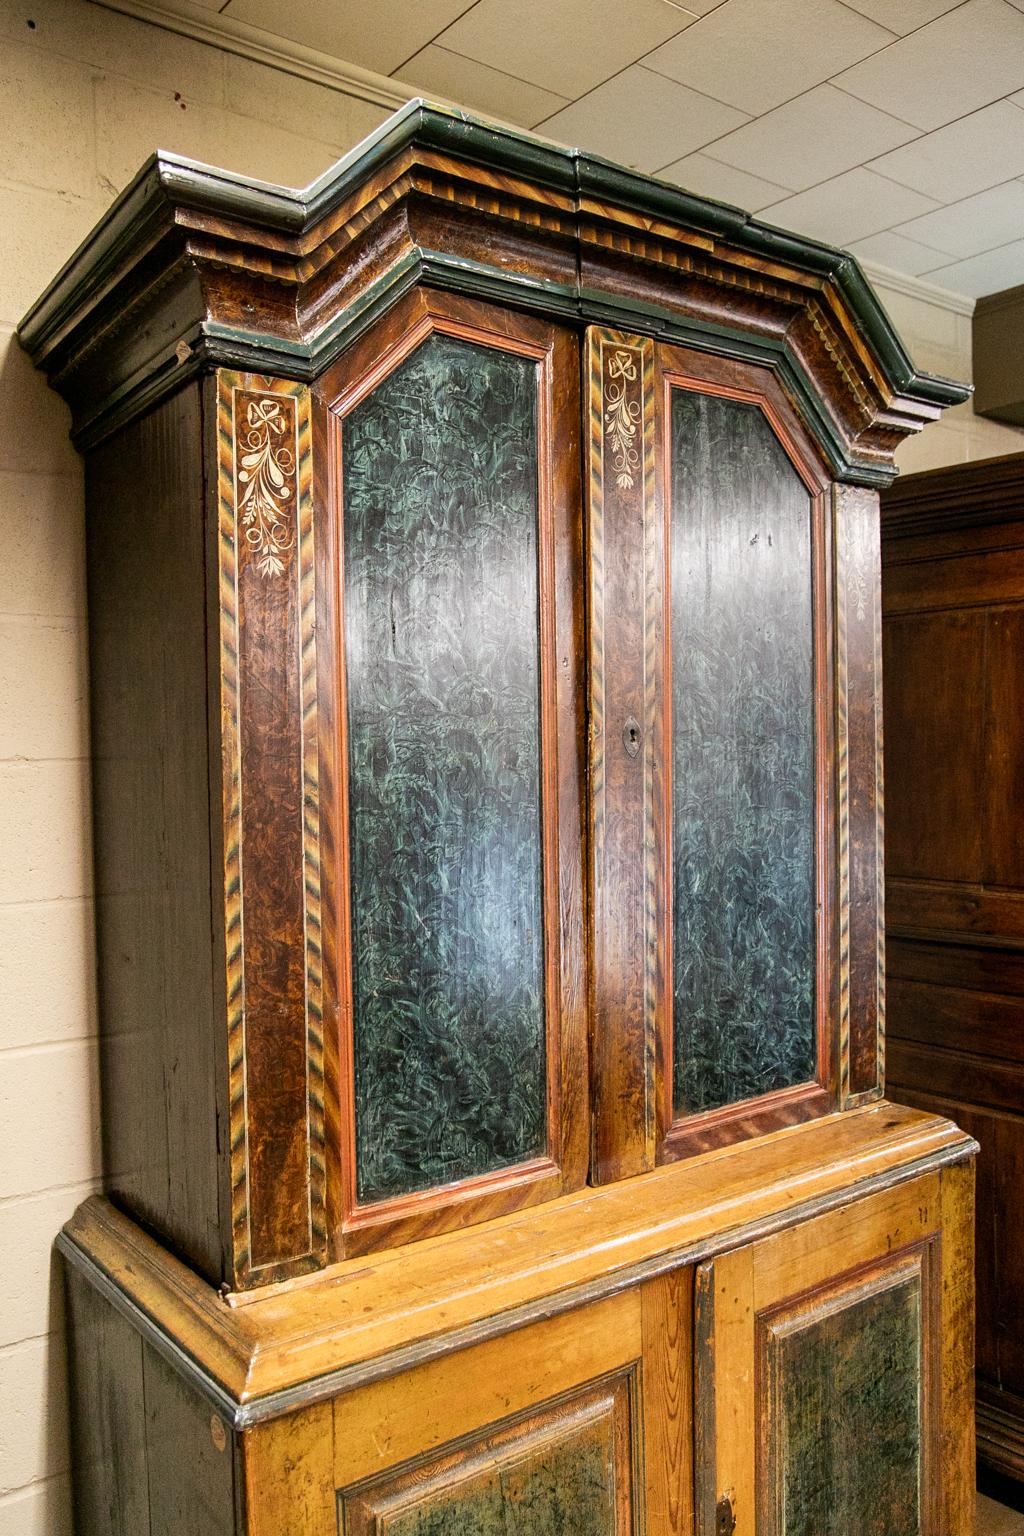 Unique painted step back cupboard has signed initials and is dated 1839. It has sponge painted panels with bowed ribbons suspending floral designs. The center and side panels are painted with brown, green, and beige stylized herringbone, with a